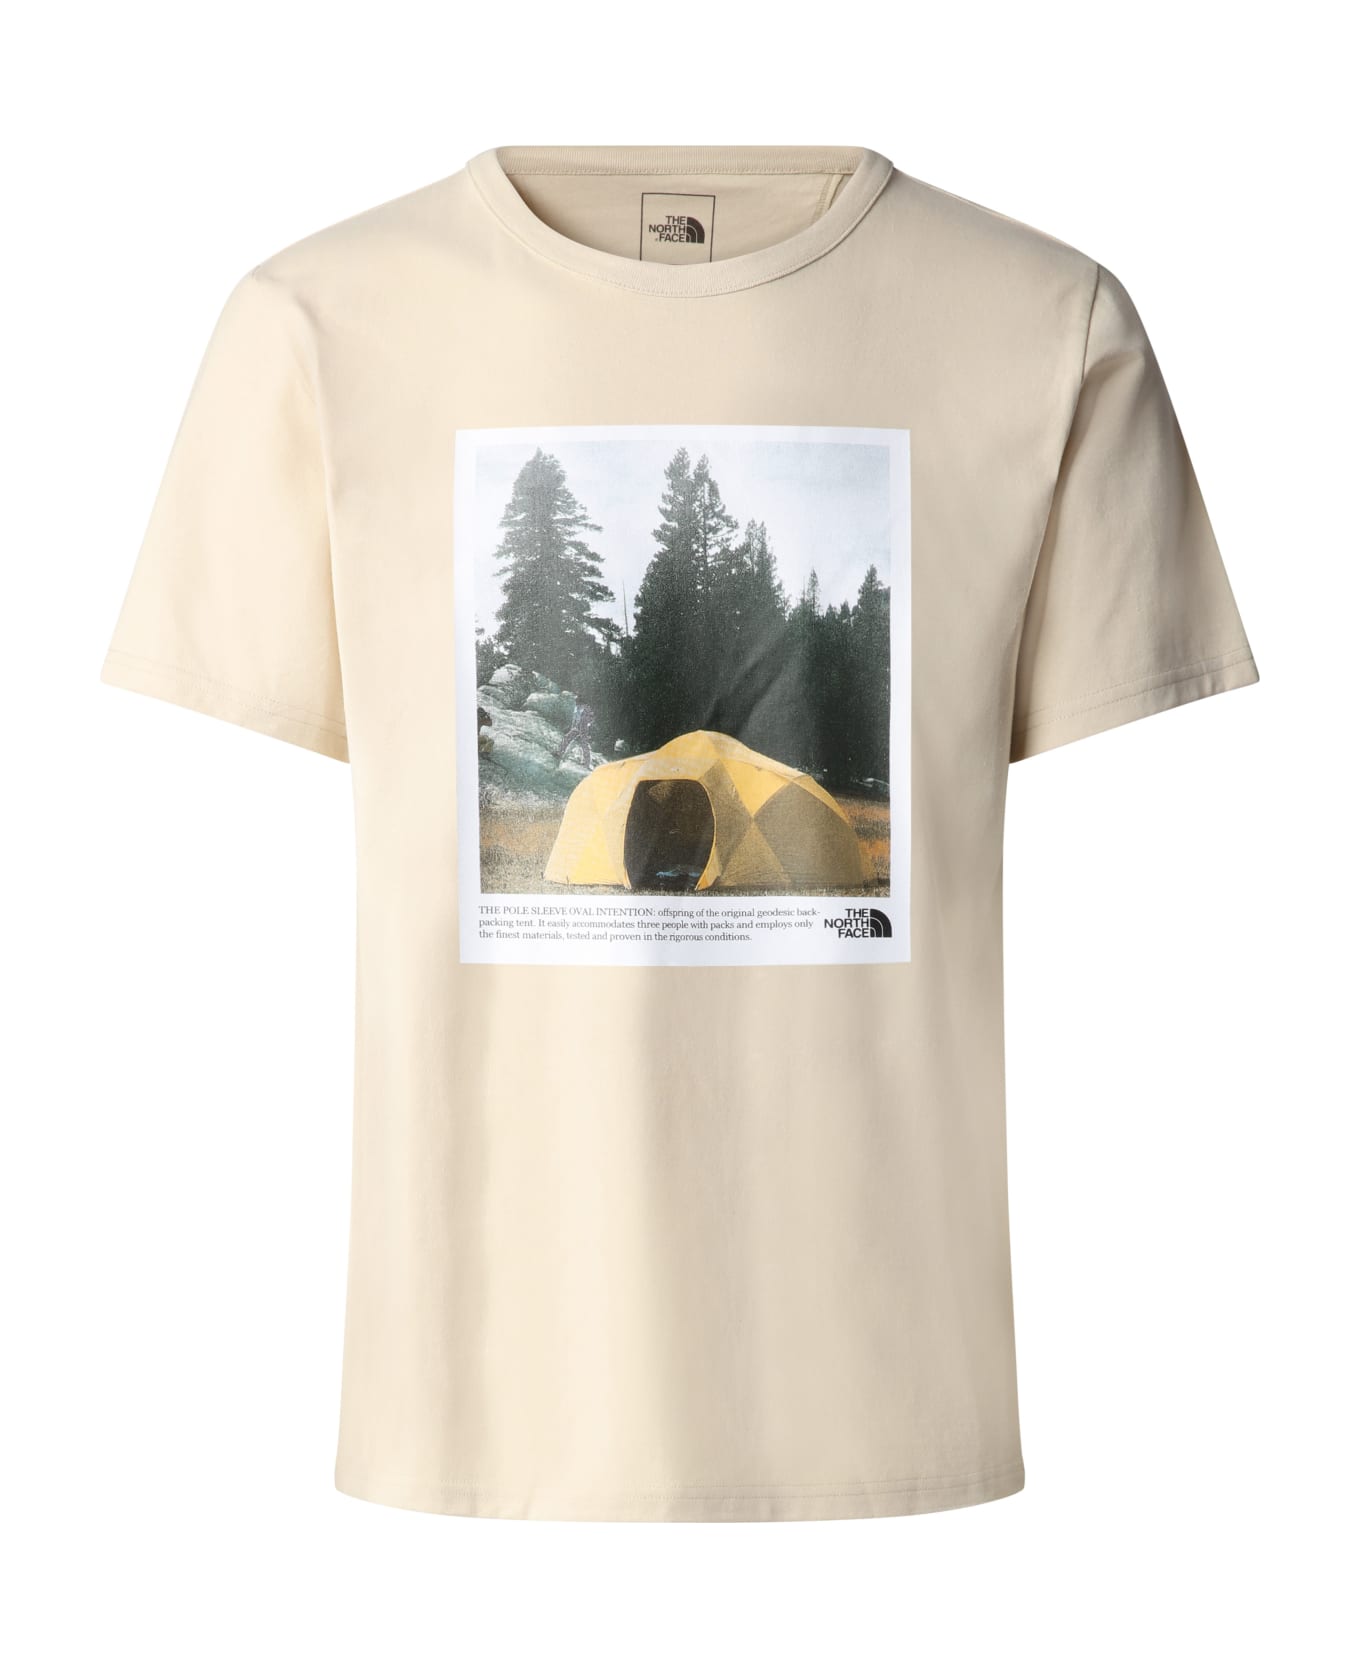 The North Face M S/s 1966 Ringer Tee - Gravel